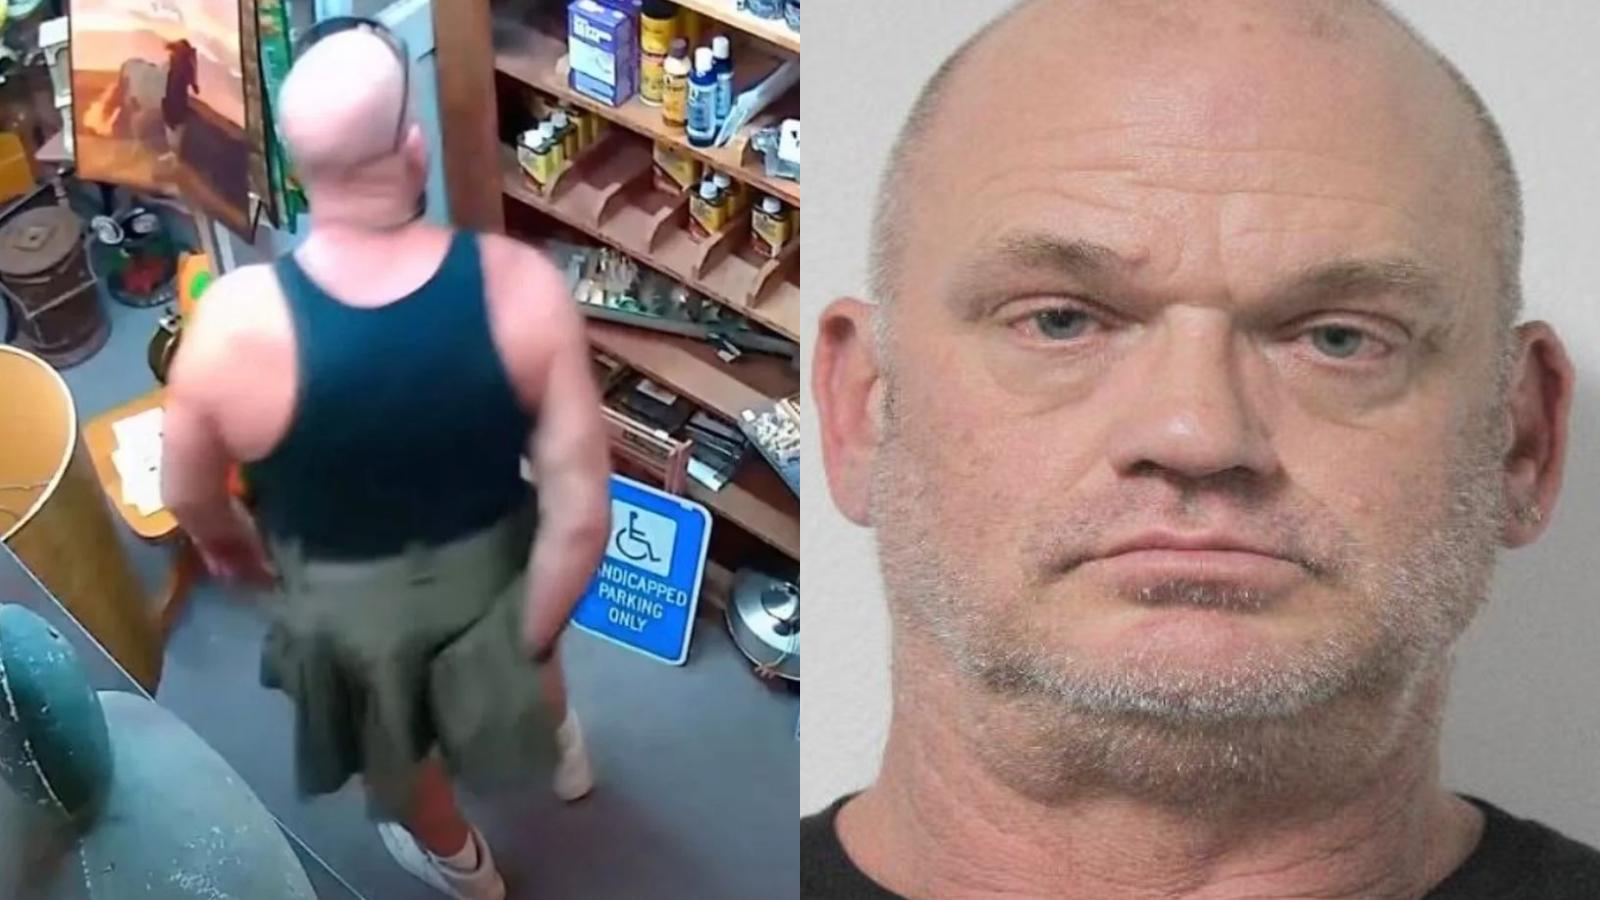 man arrested for putting antiques up his butt